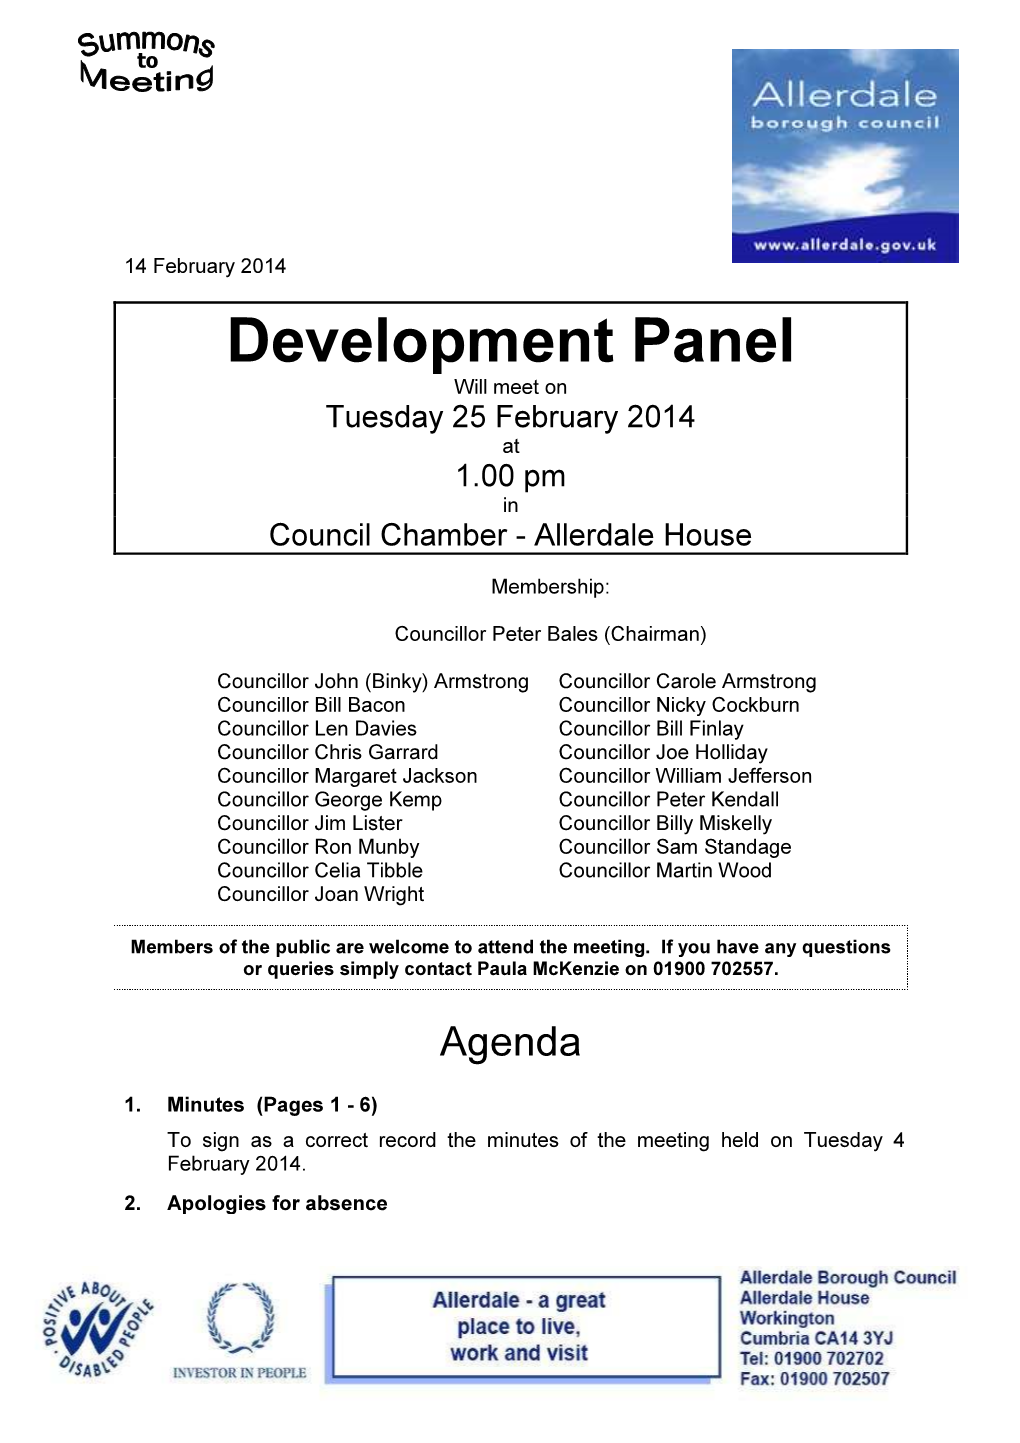 Development Panel Will Meet on Tuesday 25 February 2014 at 1.00 Pm in Council Chamber - Allerdale House